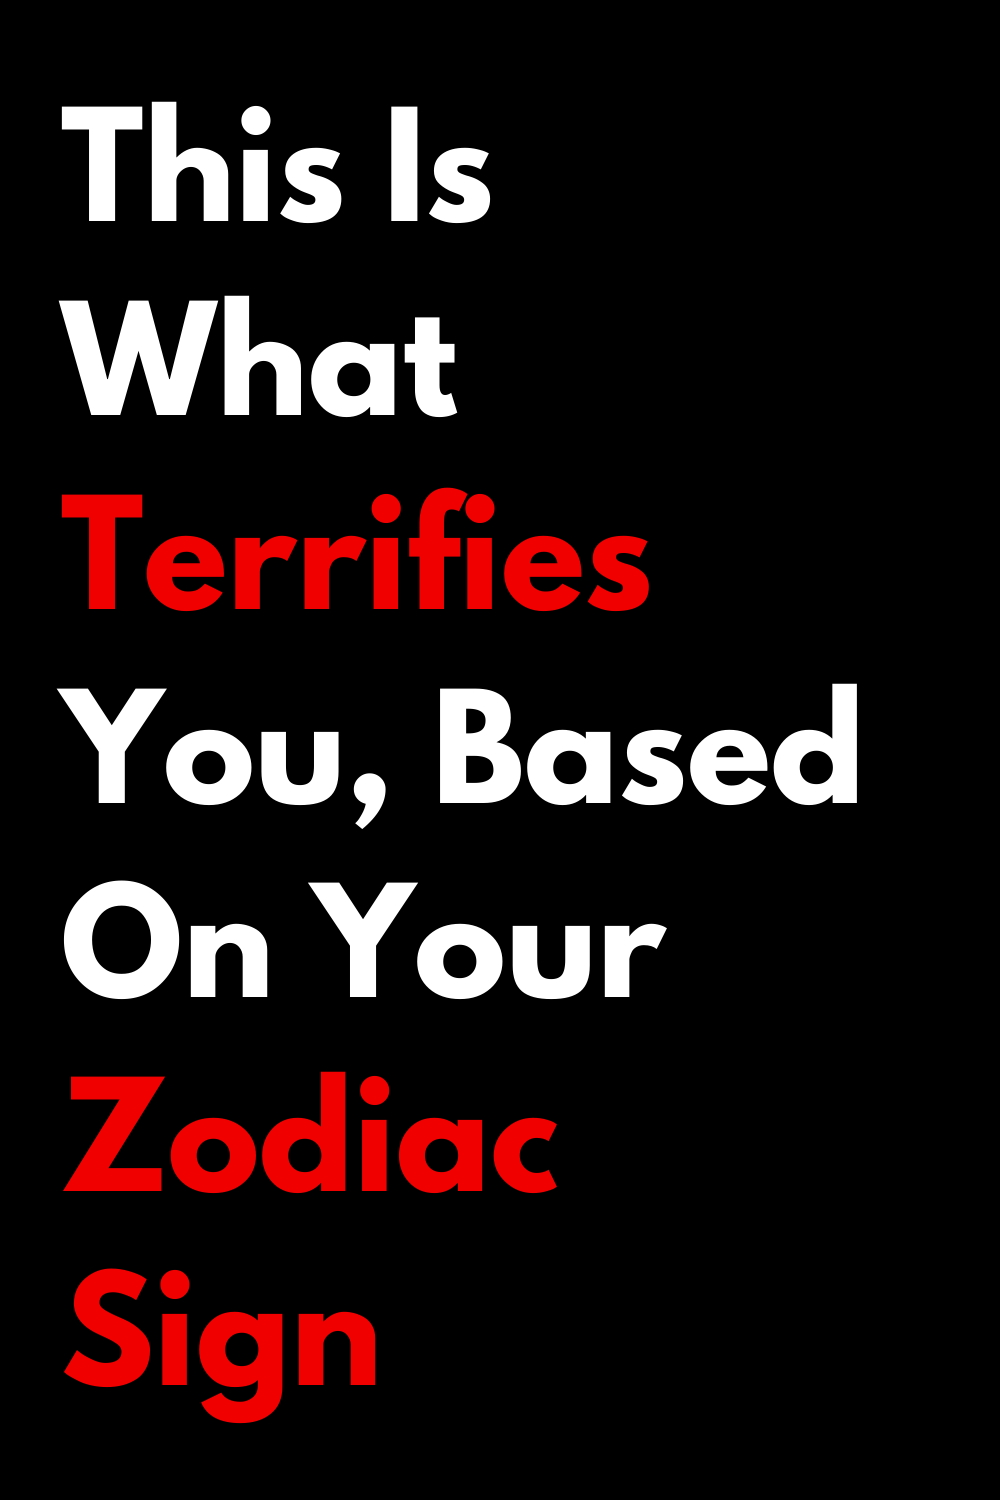 This Is What Terrifies You, Based On Your Zodiac Sign